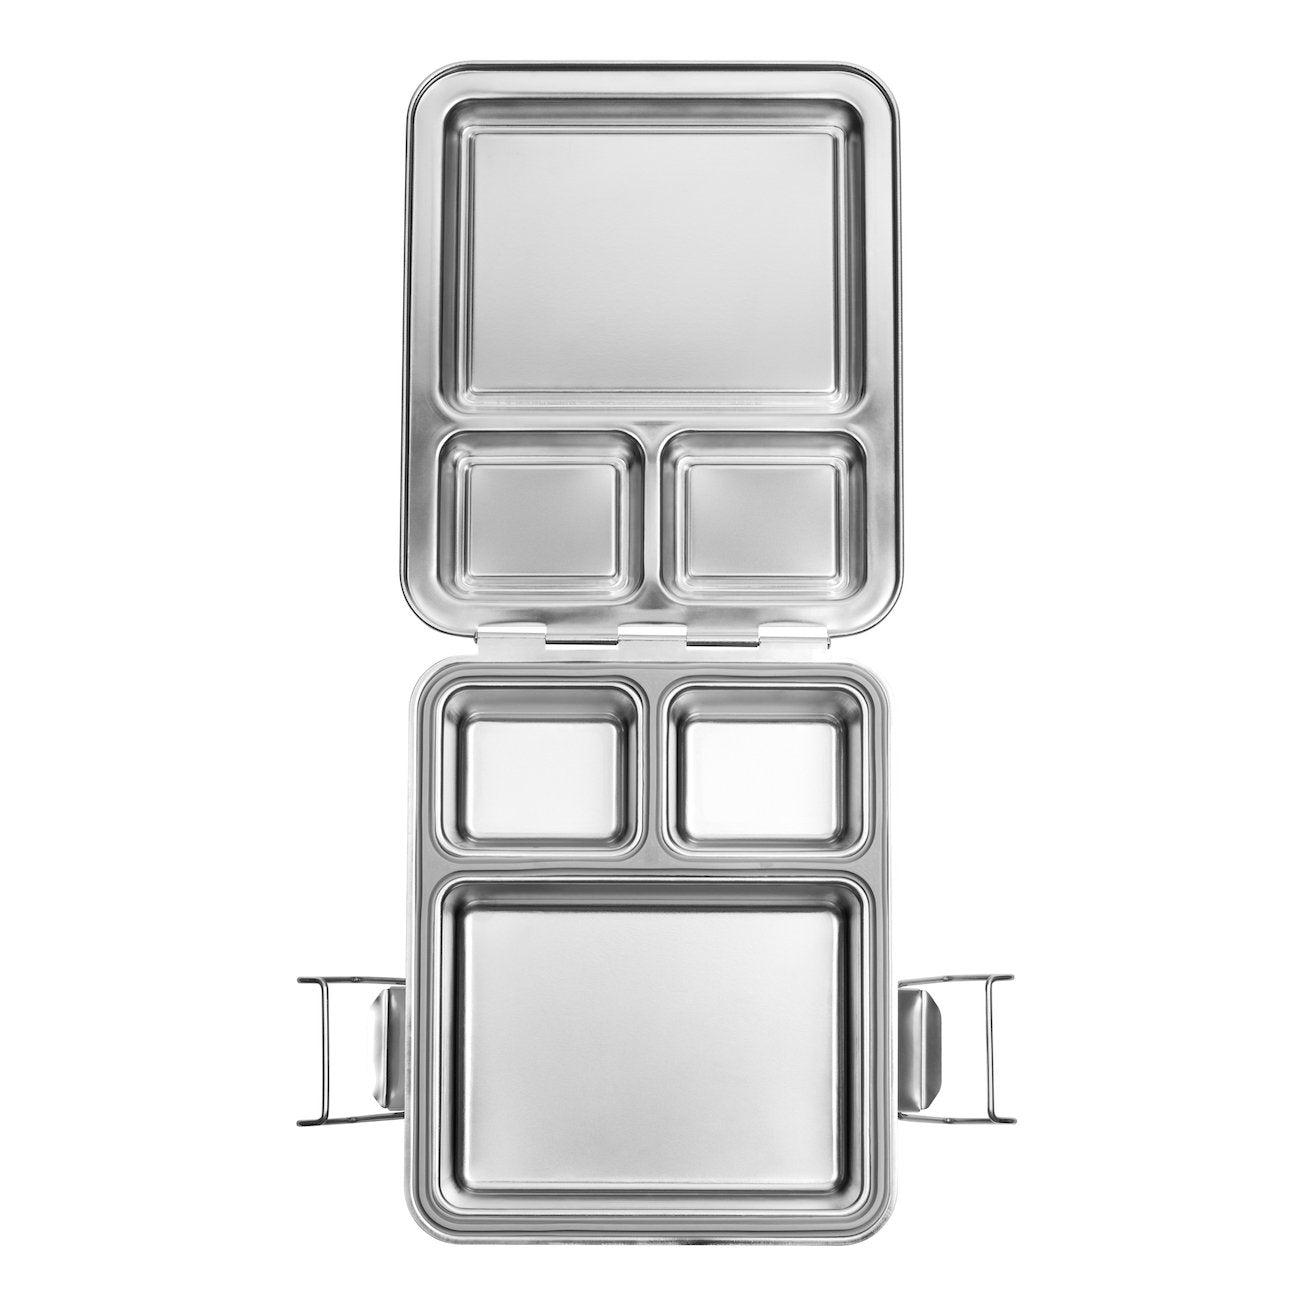 Little Lunch Box Co.: Bento Stainless Maxi (Leakproof)